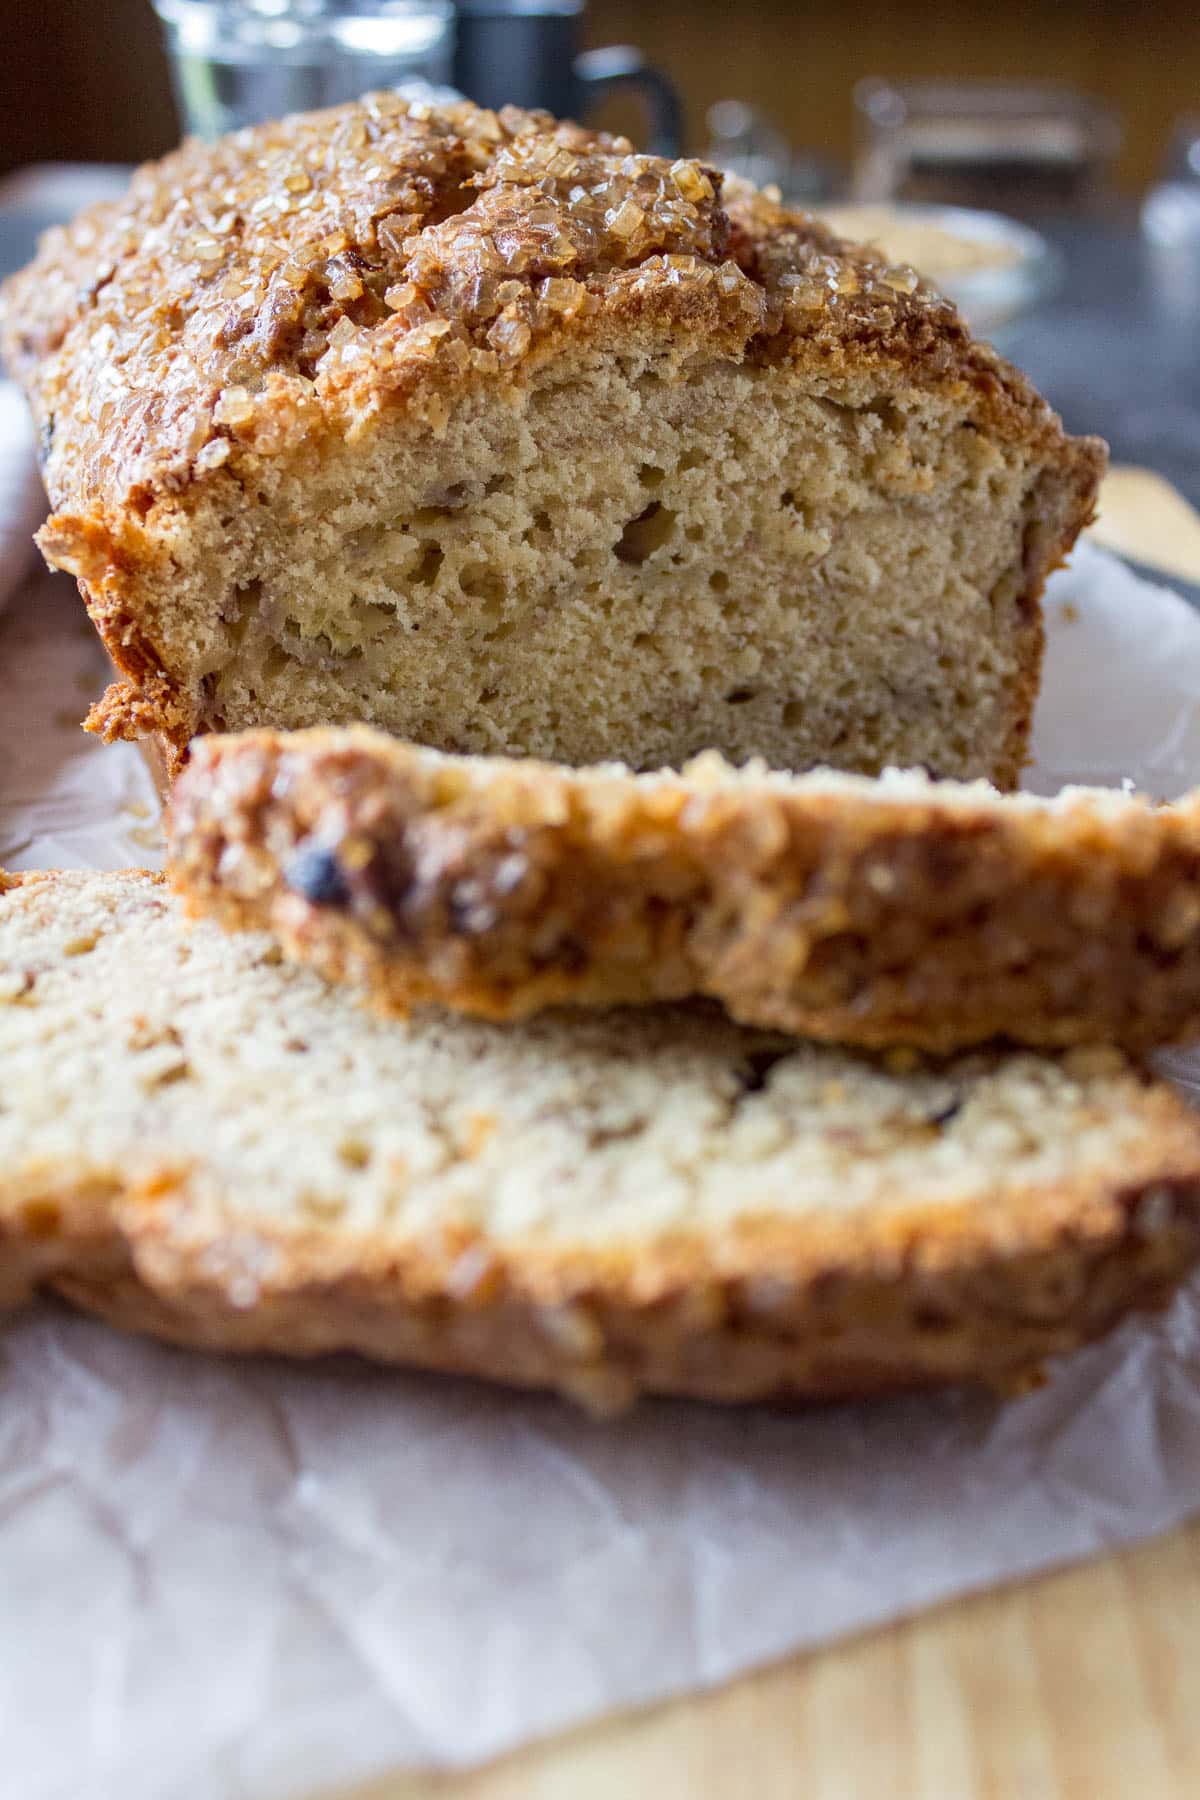 Sliced banana bread topped with coffee sugar.